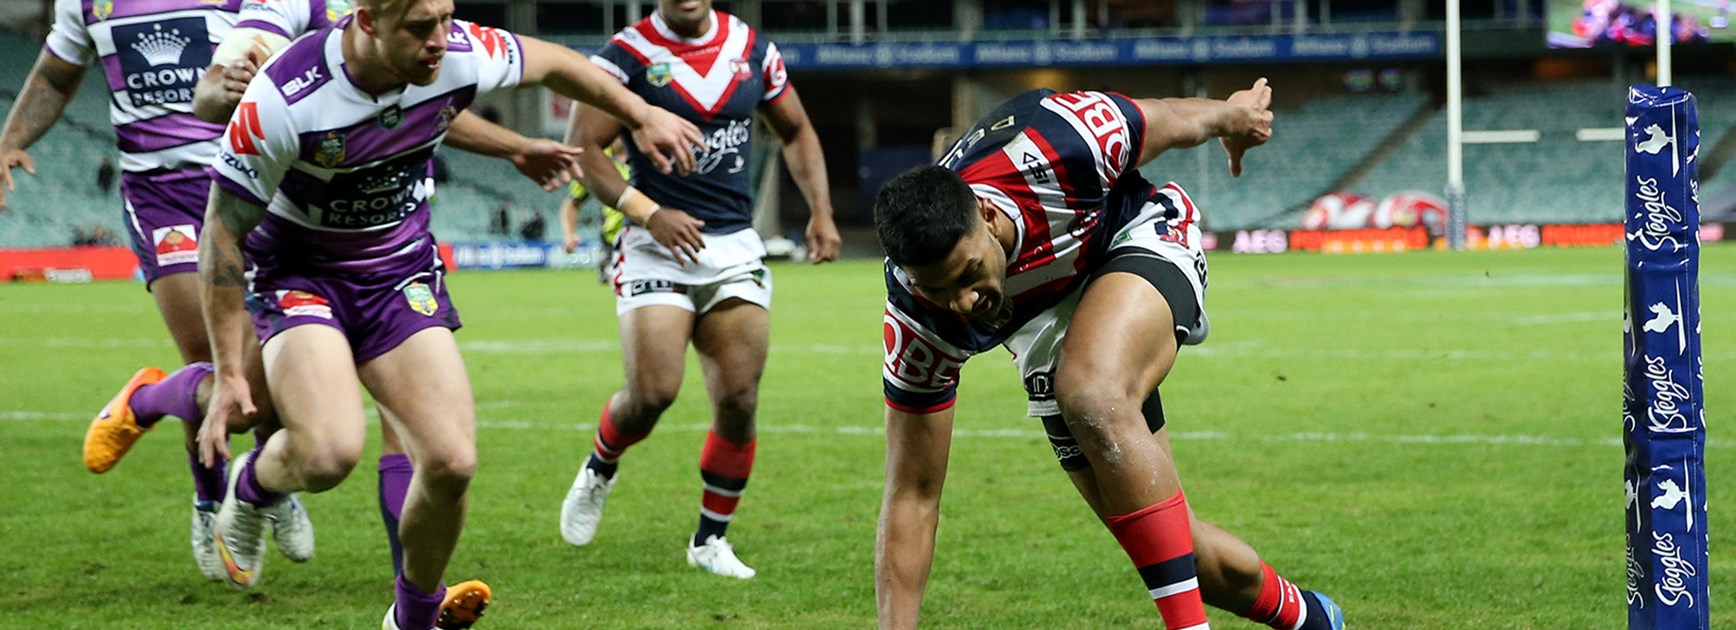 Daniel Tupou scores for the Roosters in the corner against the Storm in Round 12.